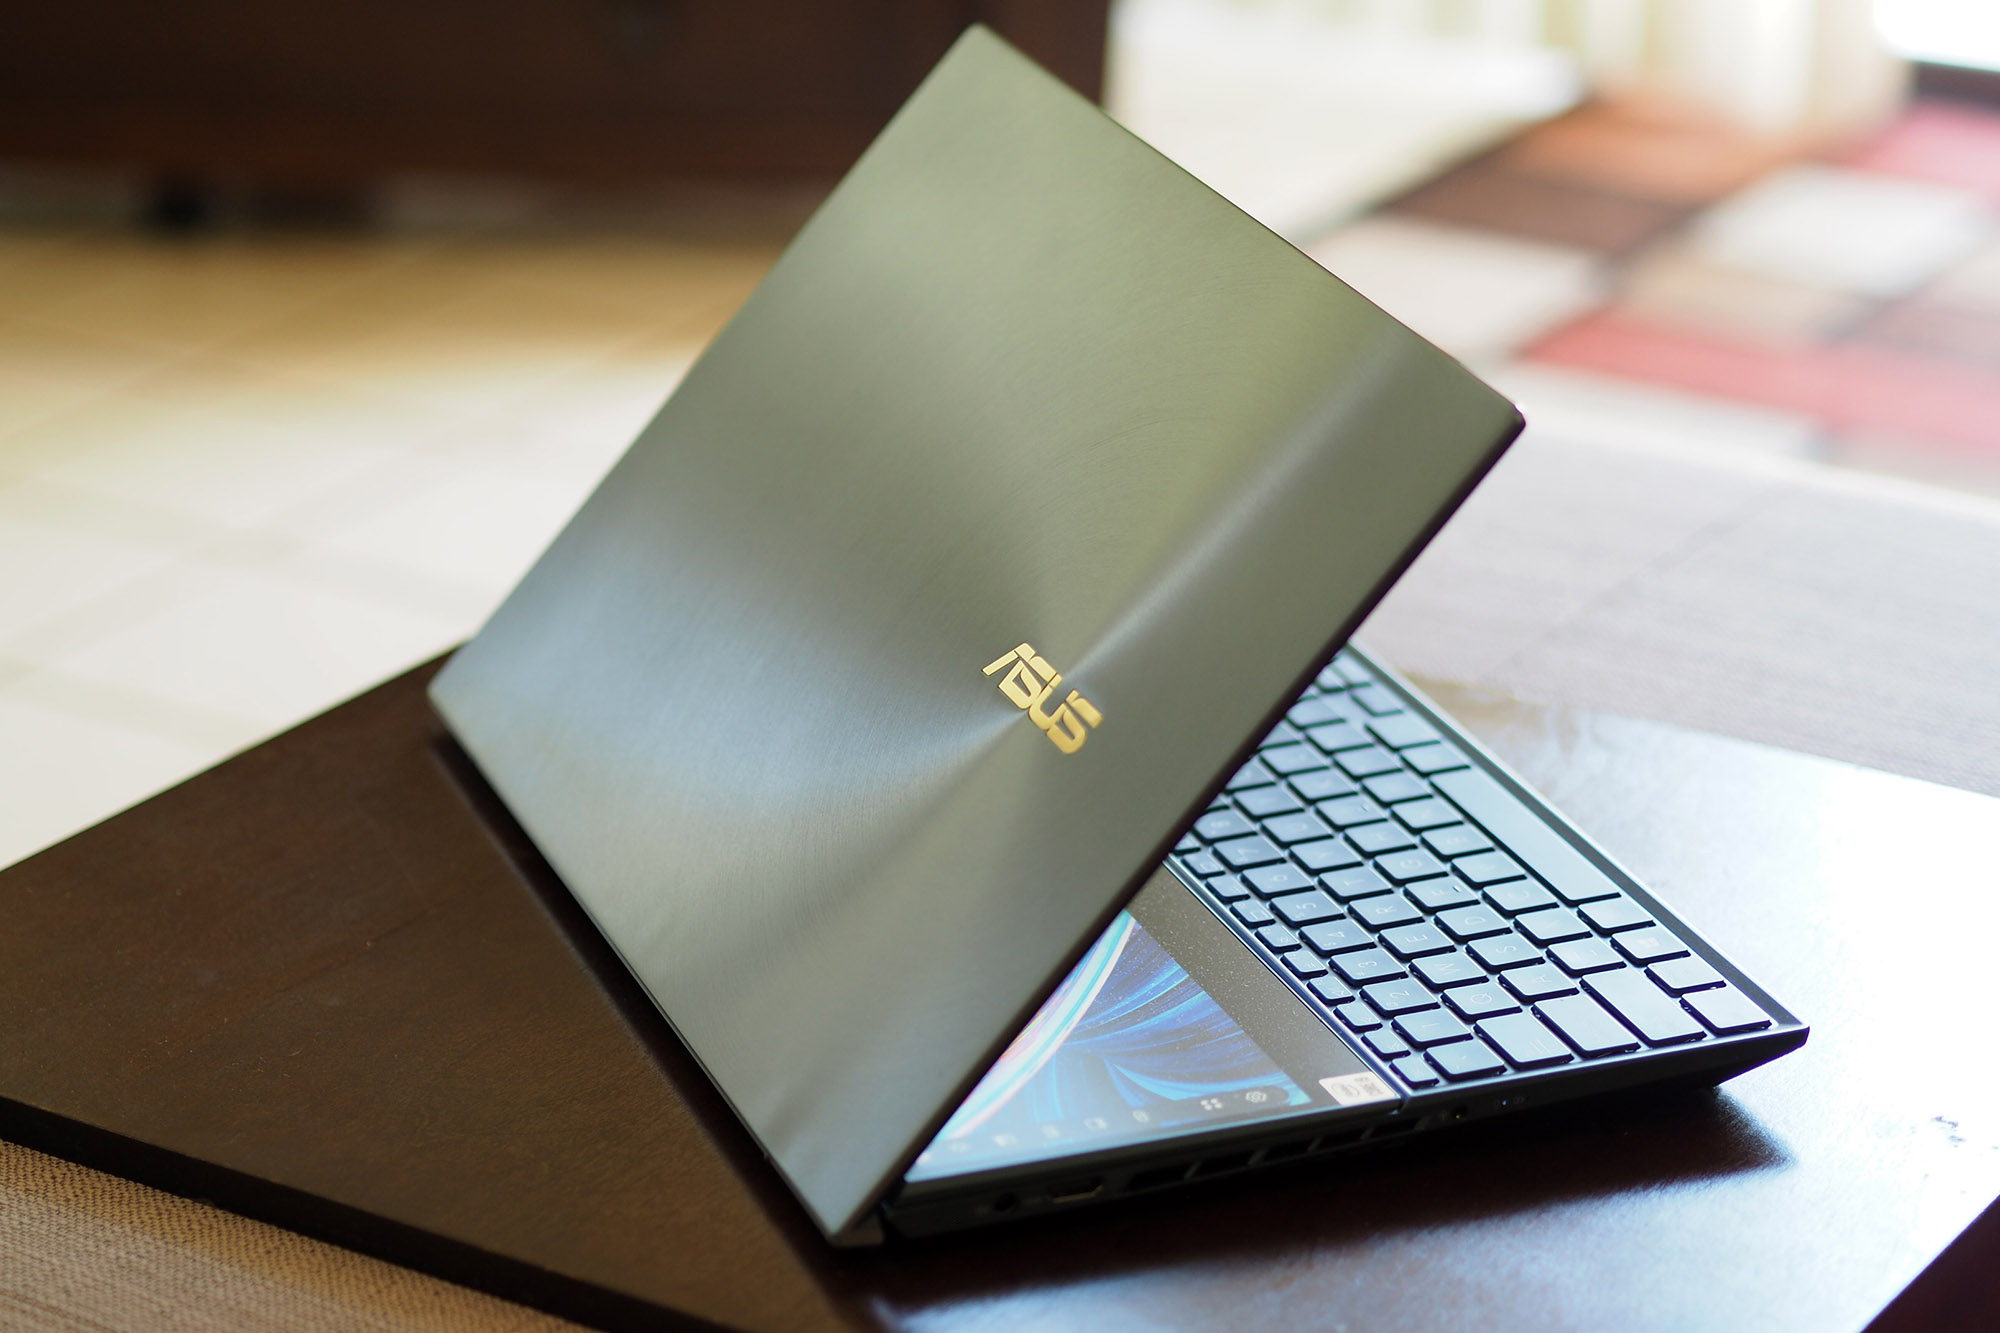 Asus Zenbook Pro Duo 15 OLED UX582 review: A $3,000 laptop like no other